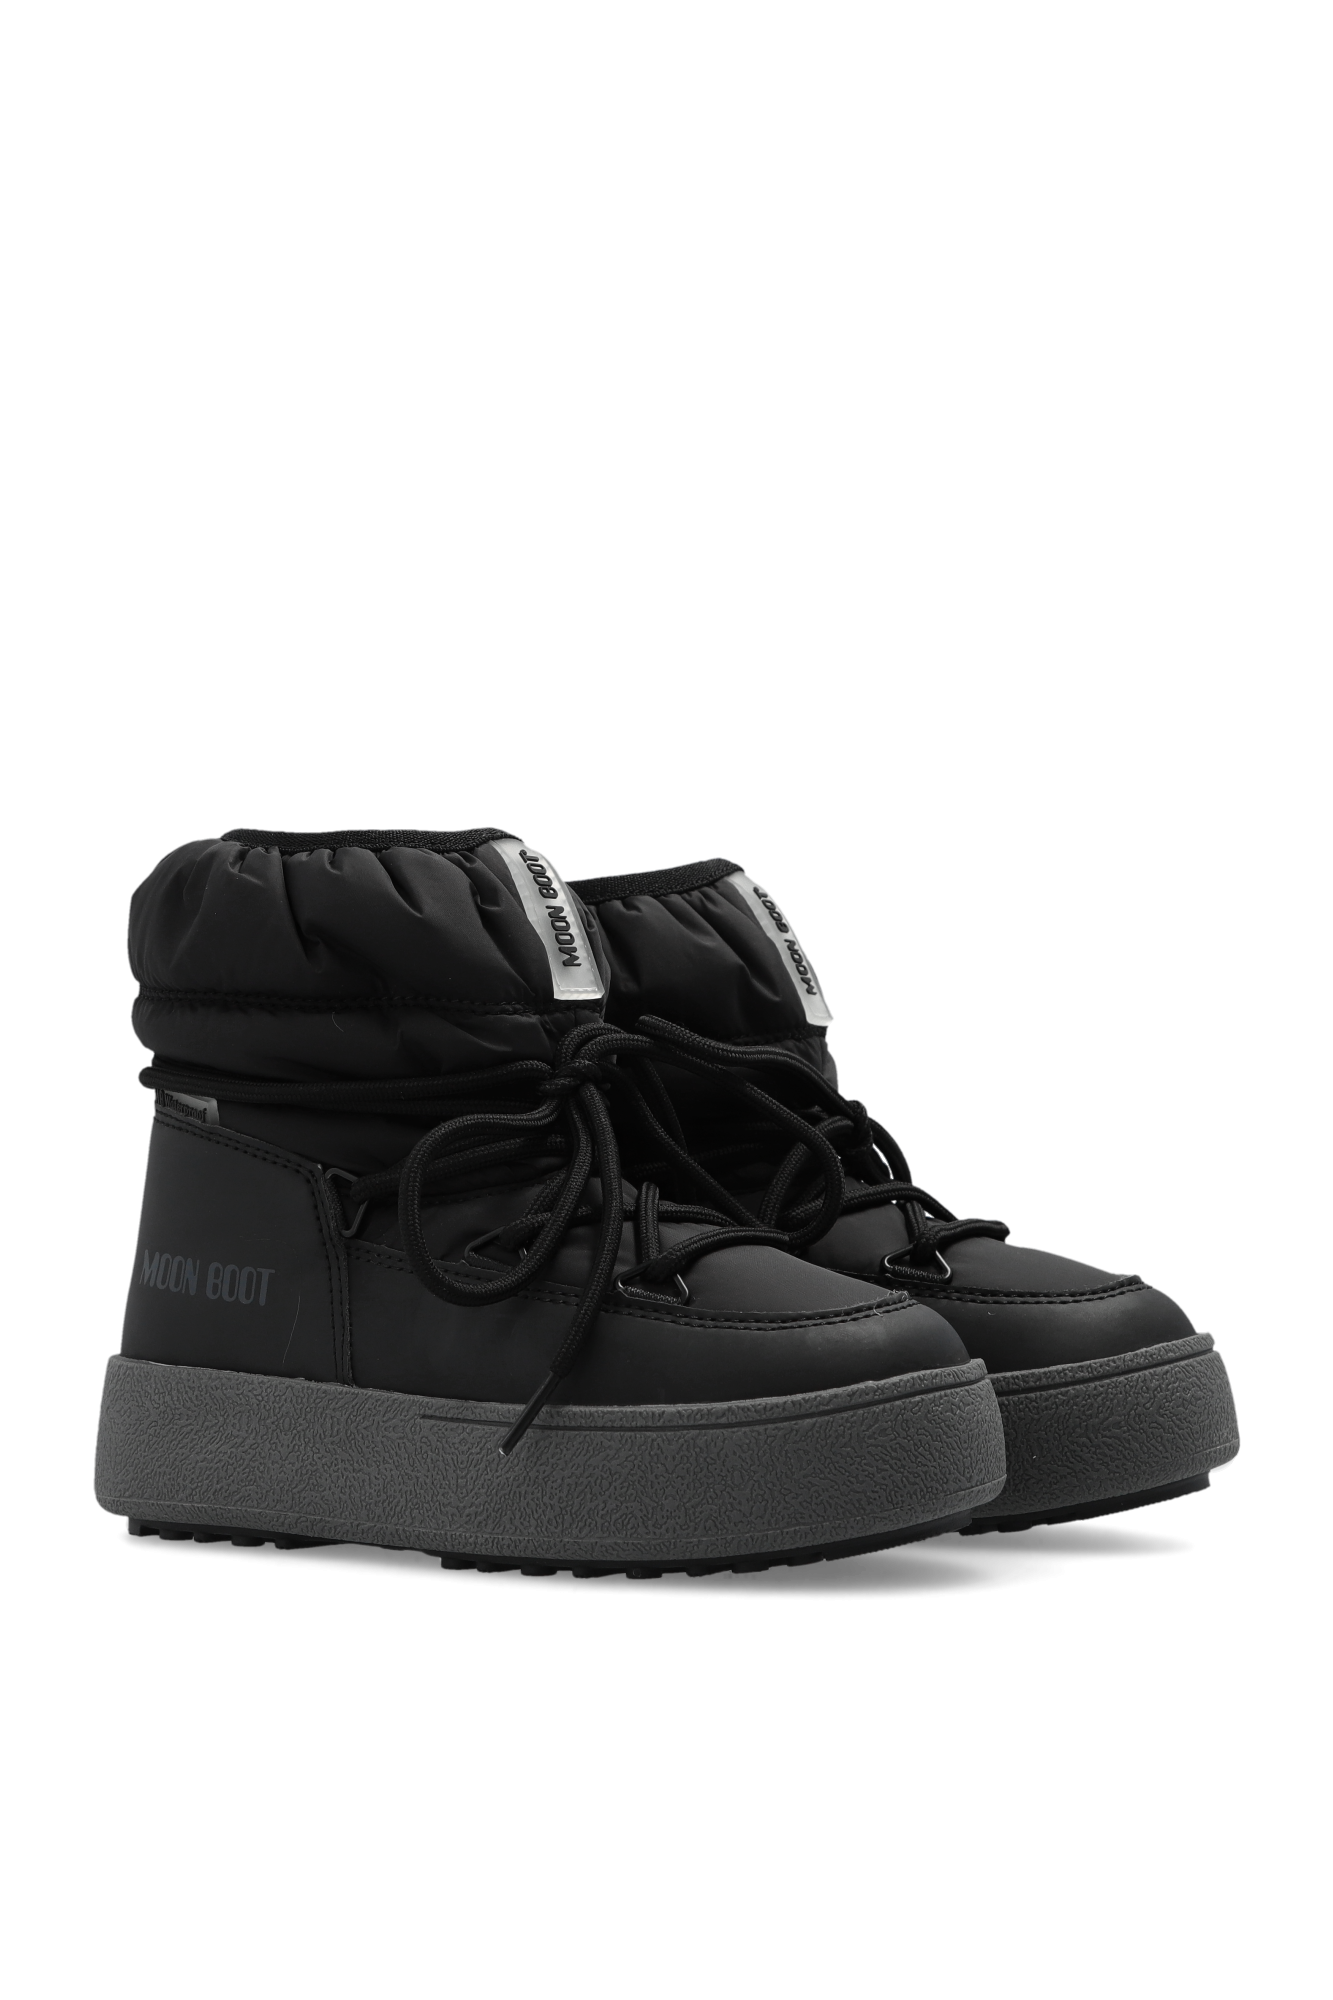 ASRA Mariana boots with harness detail in black leather ‘Jtrack Low’ snow boots